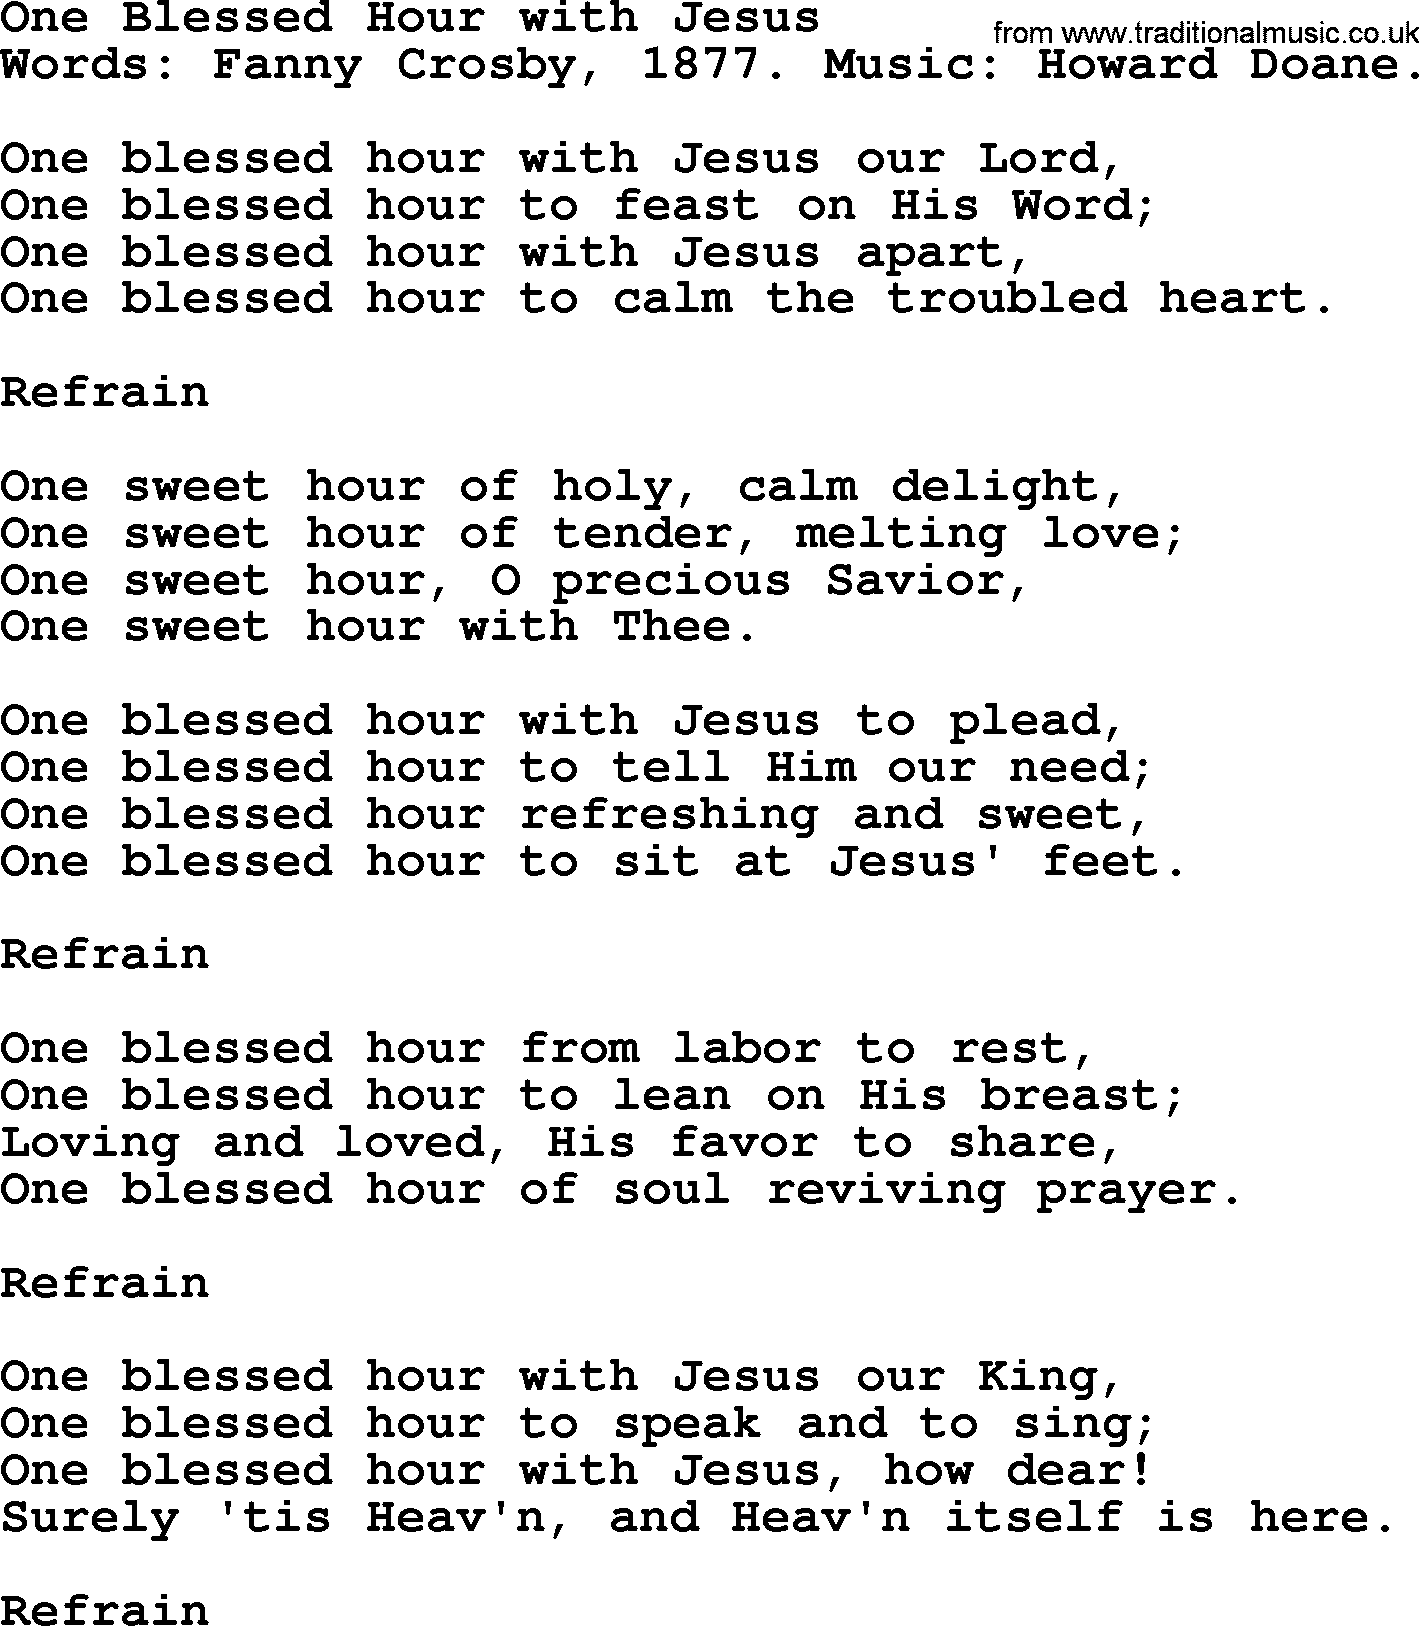 Fanny Crosby song: One Blessed Hour With Jesus, lyrics